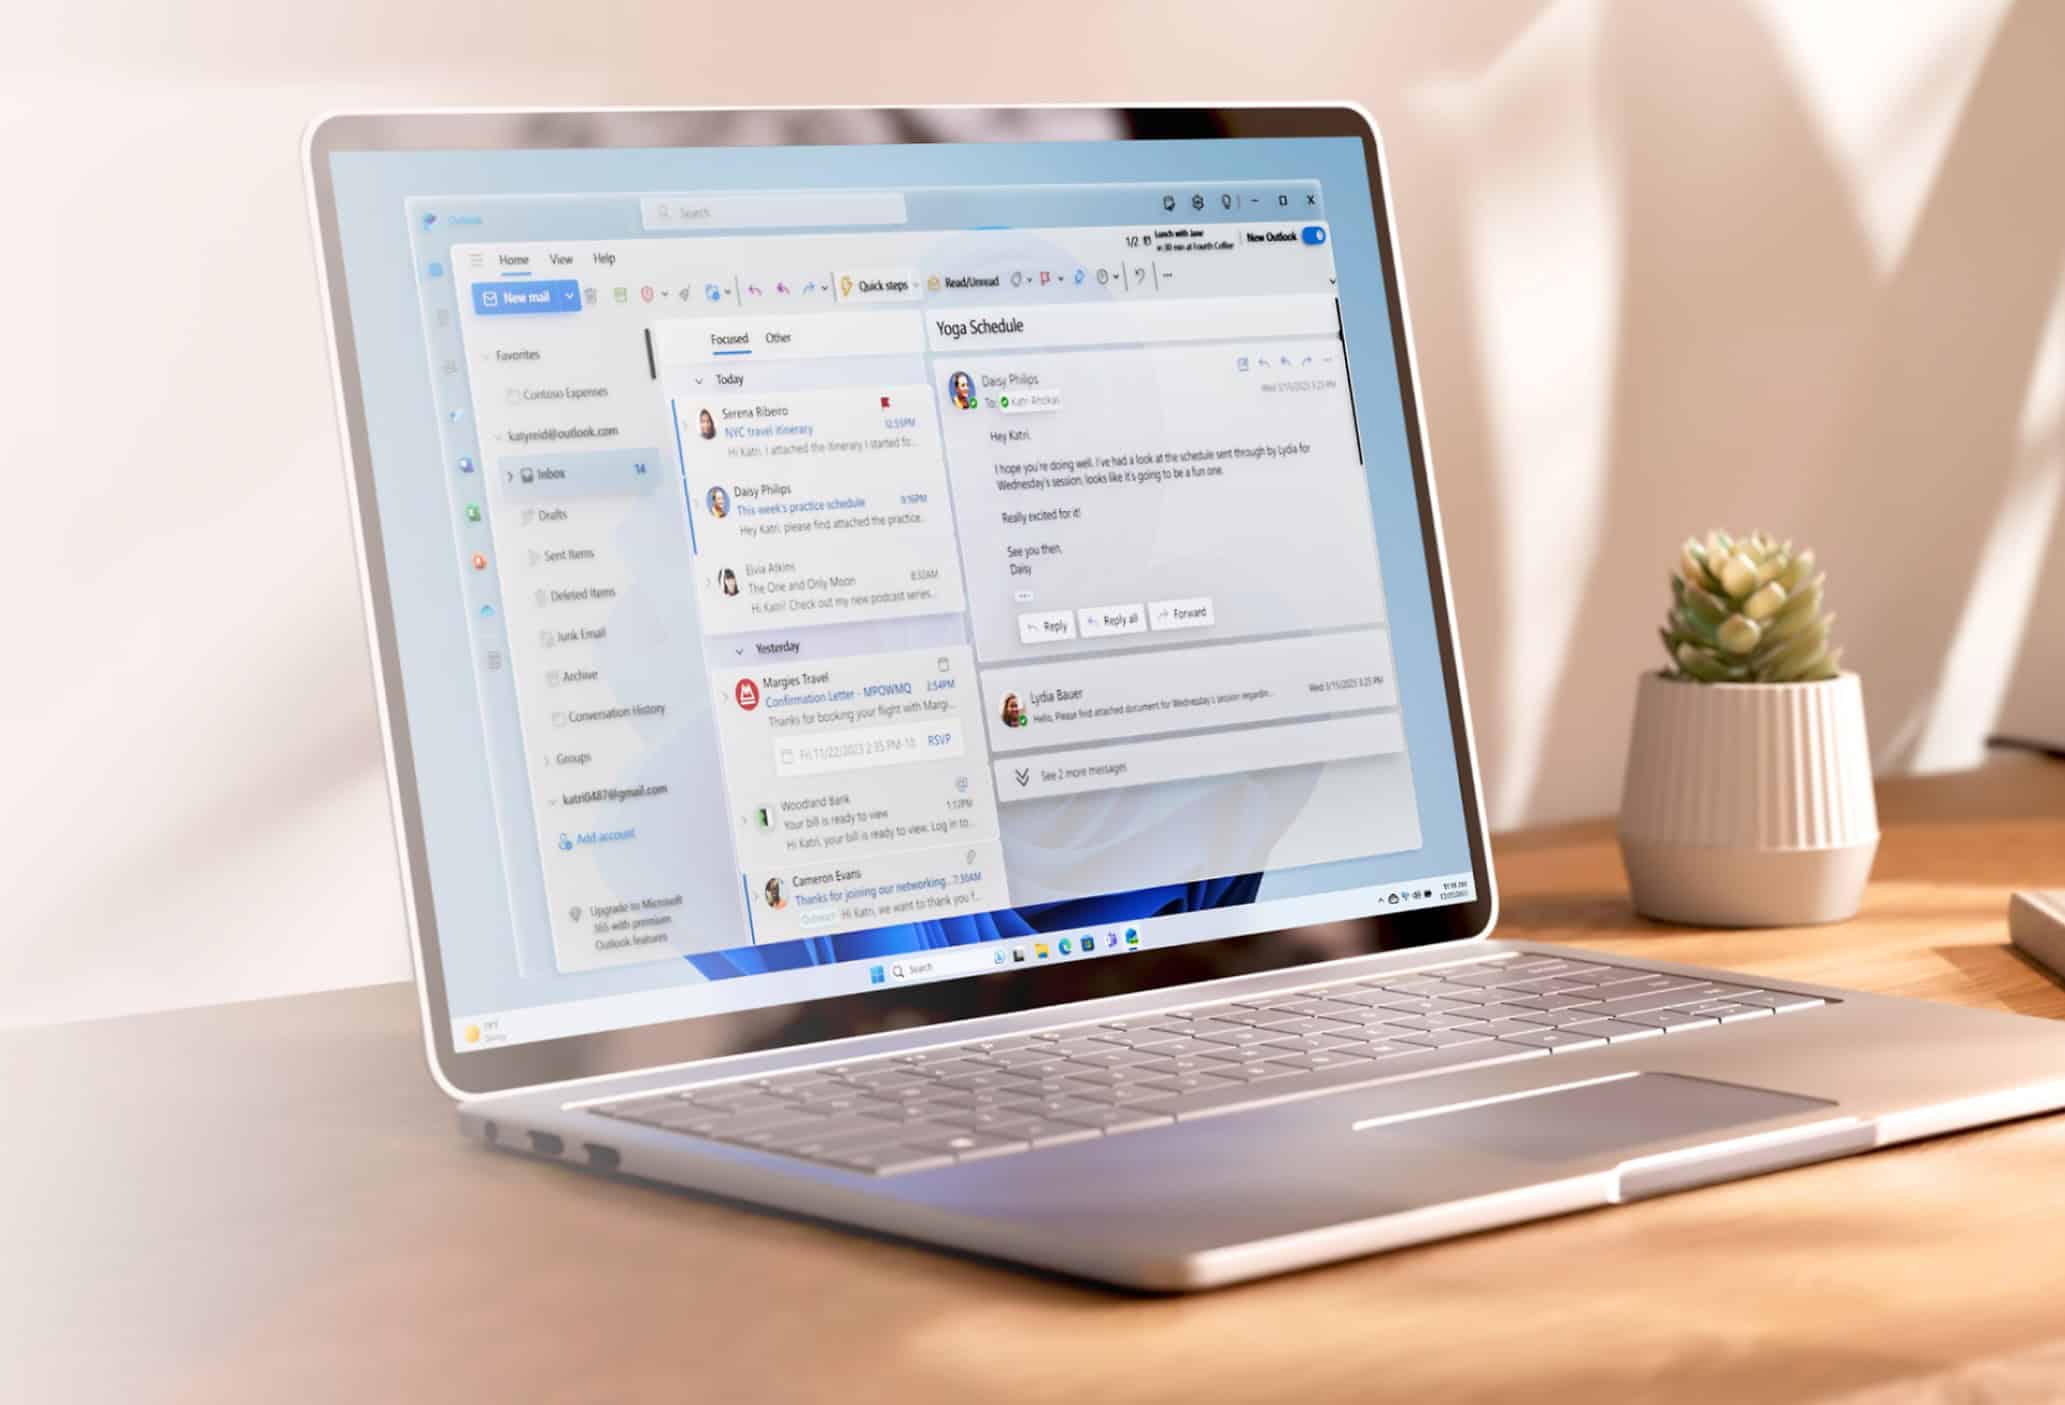 Microsoft strengthens Outlook security, retires legacy features